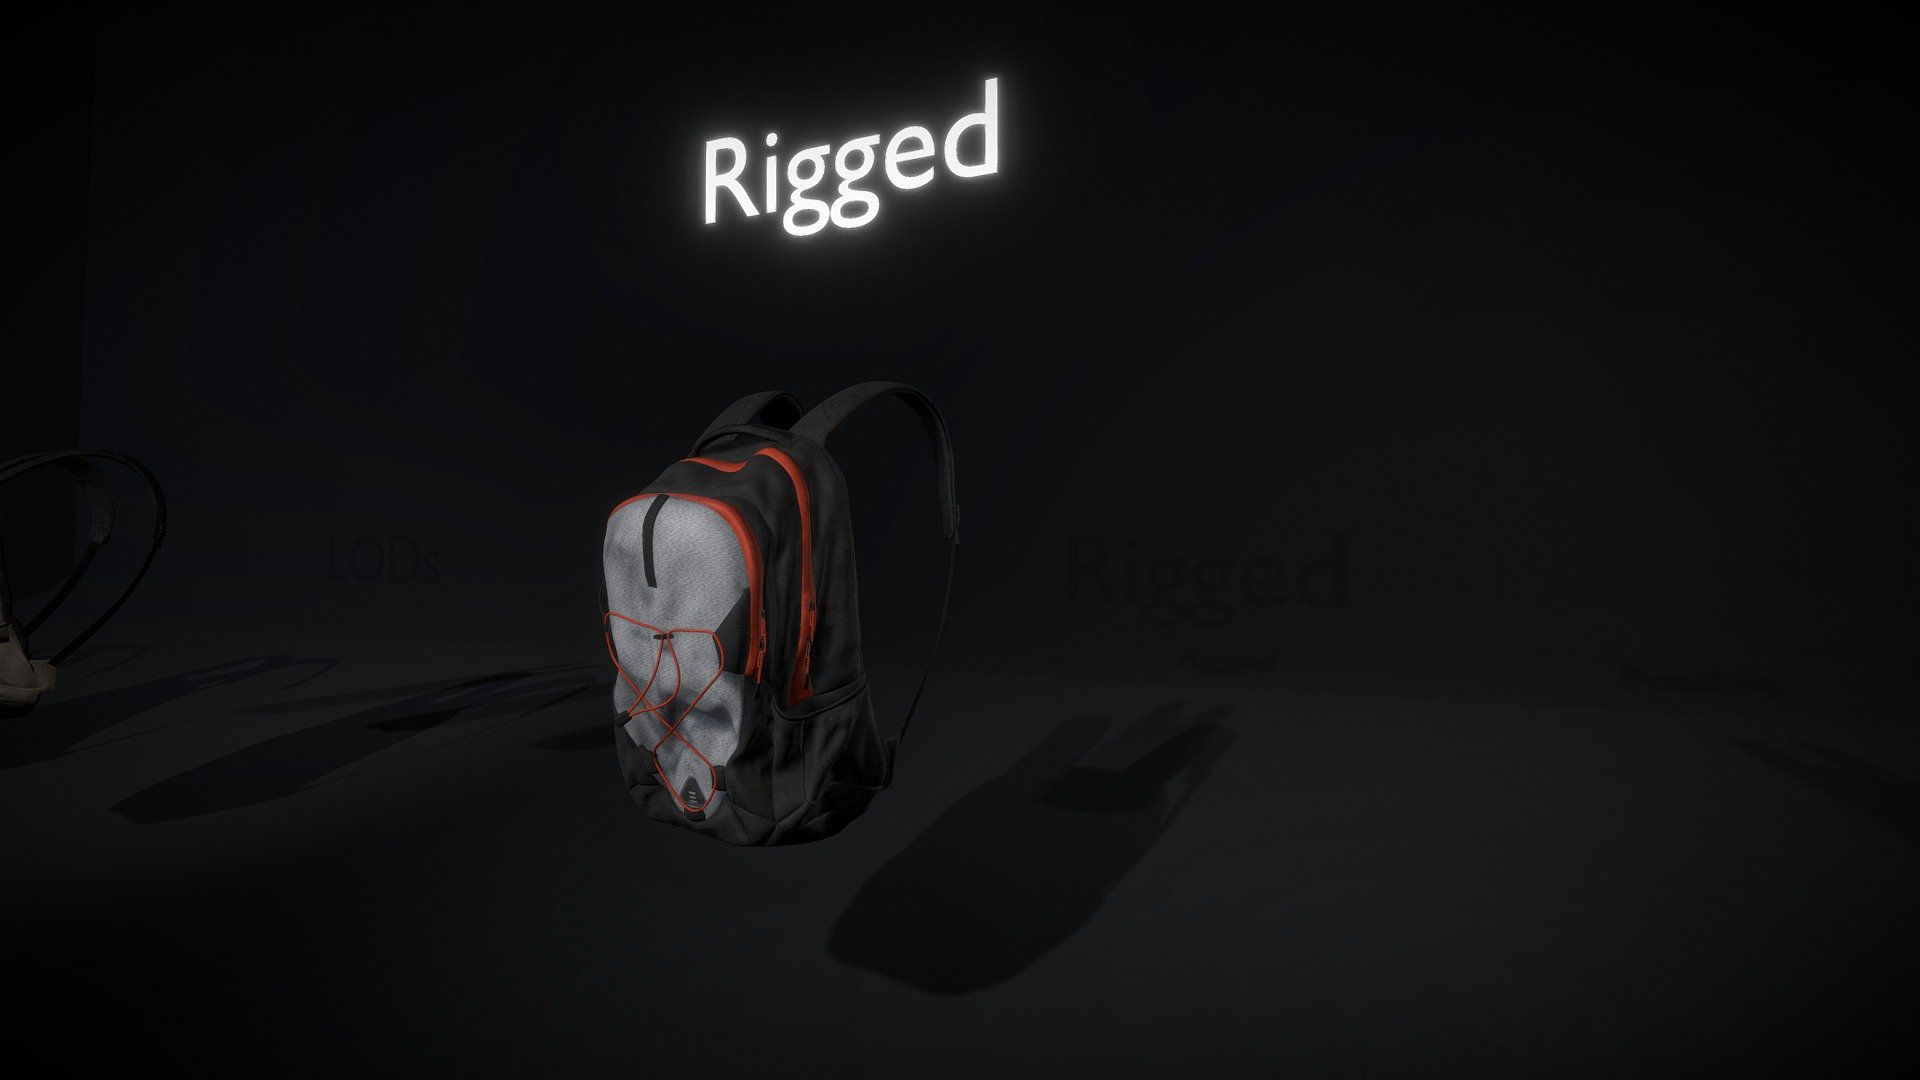 Included:


Fully Rigged Backpack
Easily pose backpack on character or set piece
Full 4k PBR textures
Customize colors, patterns and wear in blend file
LODs for different use cases
FBX, OBJ, and .blend files

Hope you find it useful. If you have any questions drop a comment and Ill try and get back to you 3d model